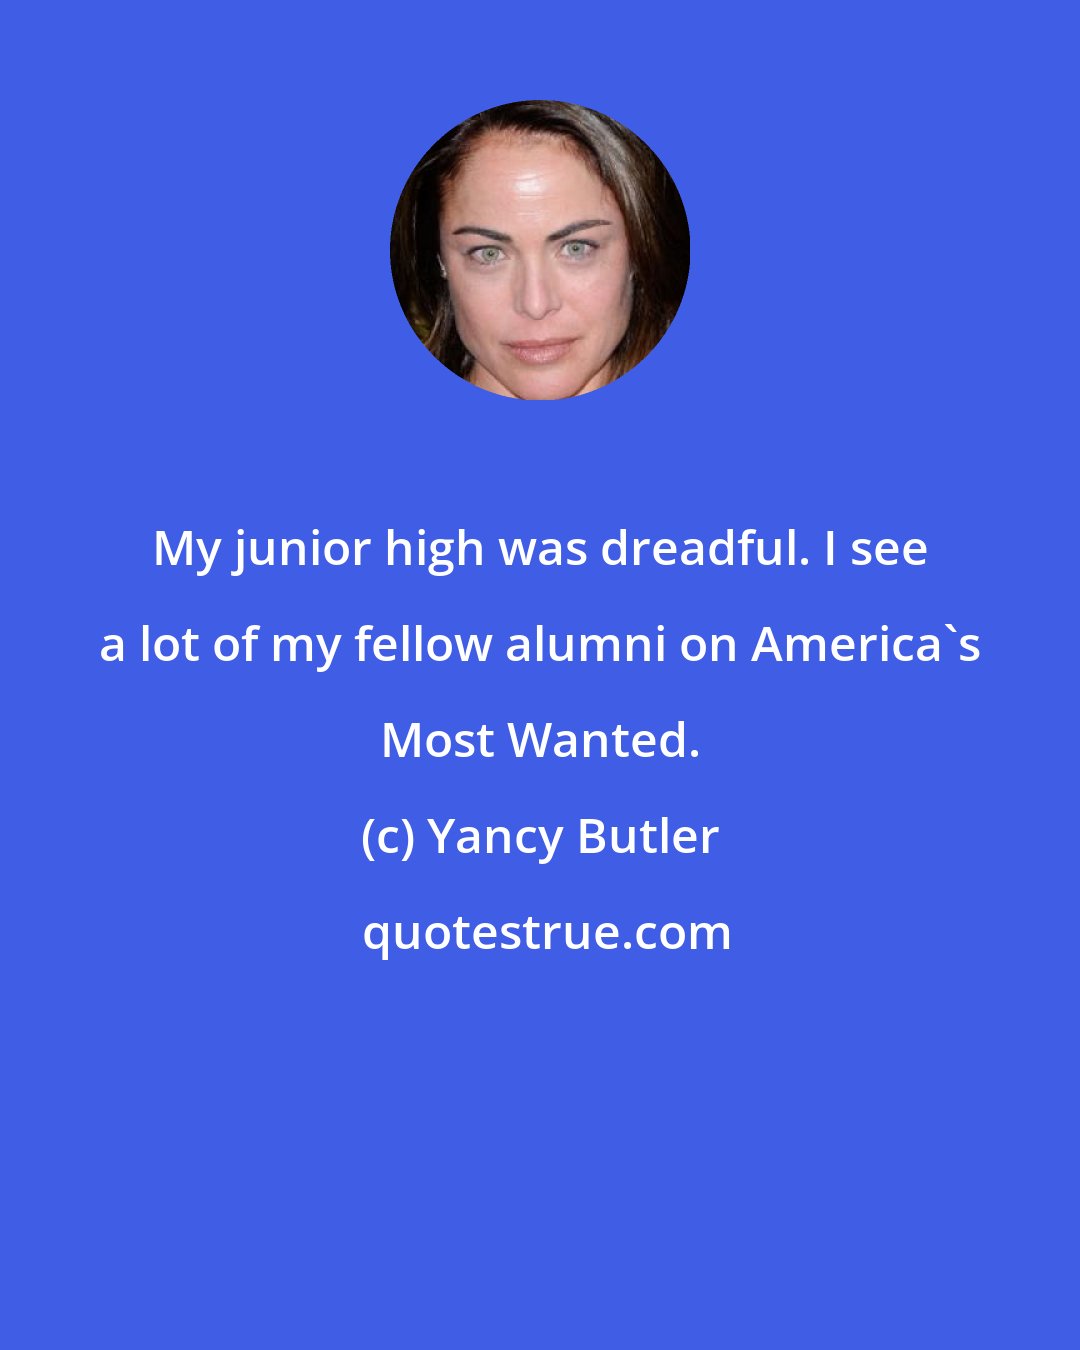 Yancy Butler: My junior high was dreadful. I see a lot of my fellow alumni on America's Most Wanted.